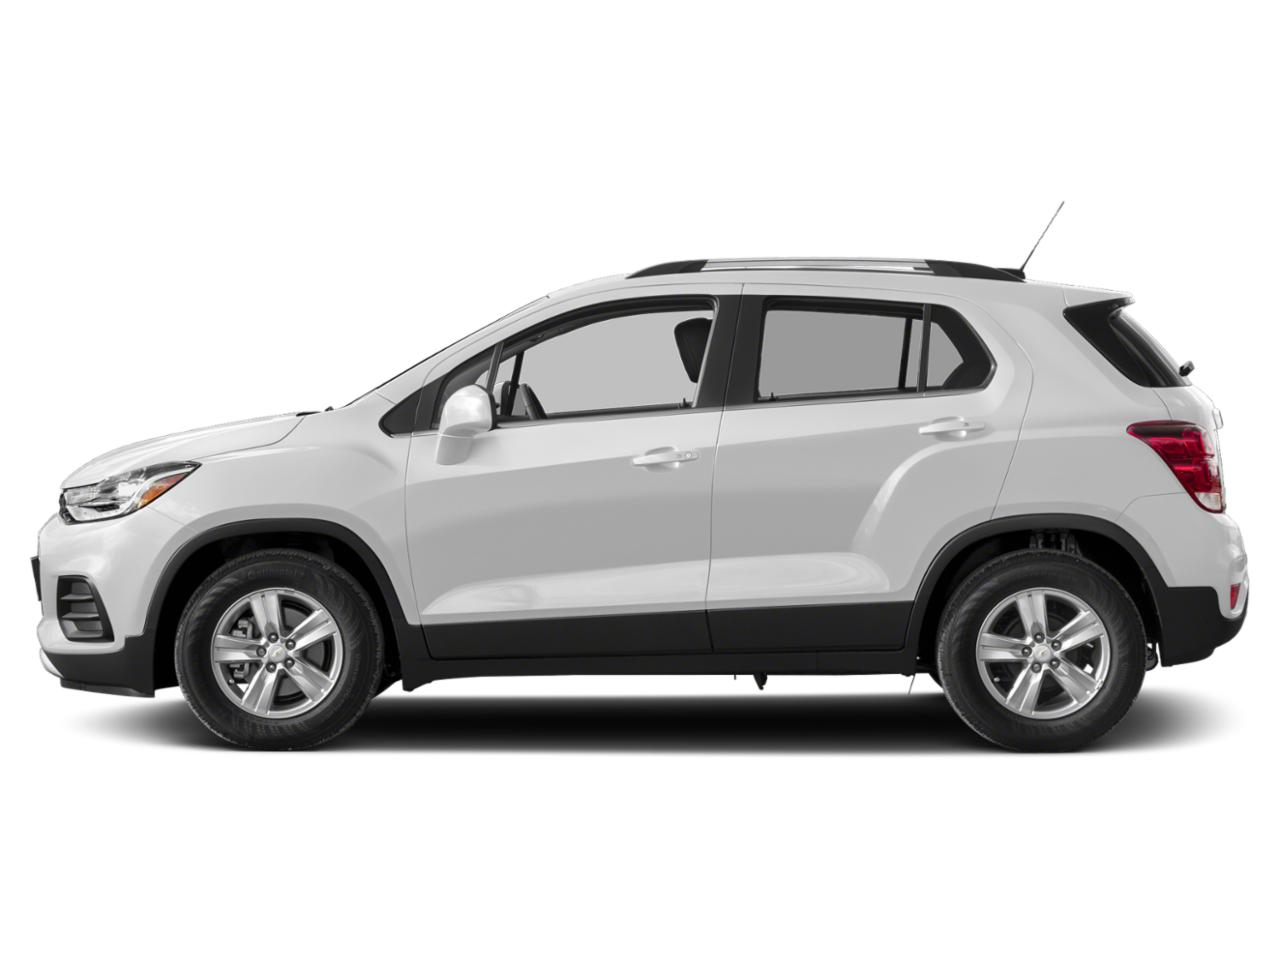 2019 chevy trax towing capacity